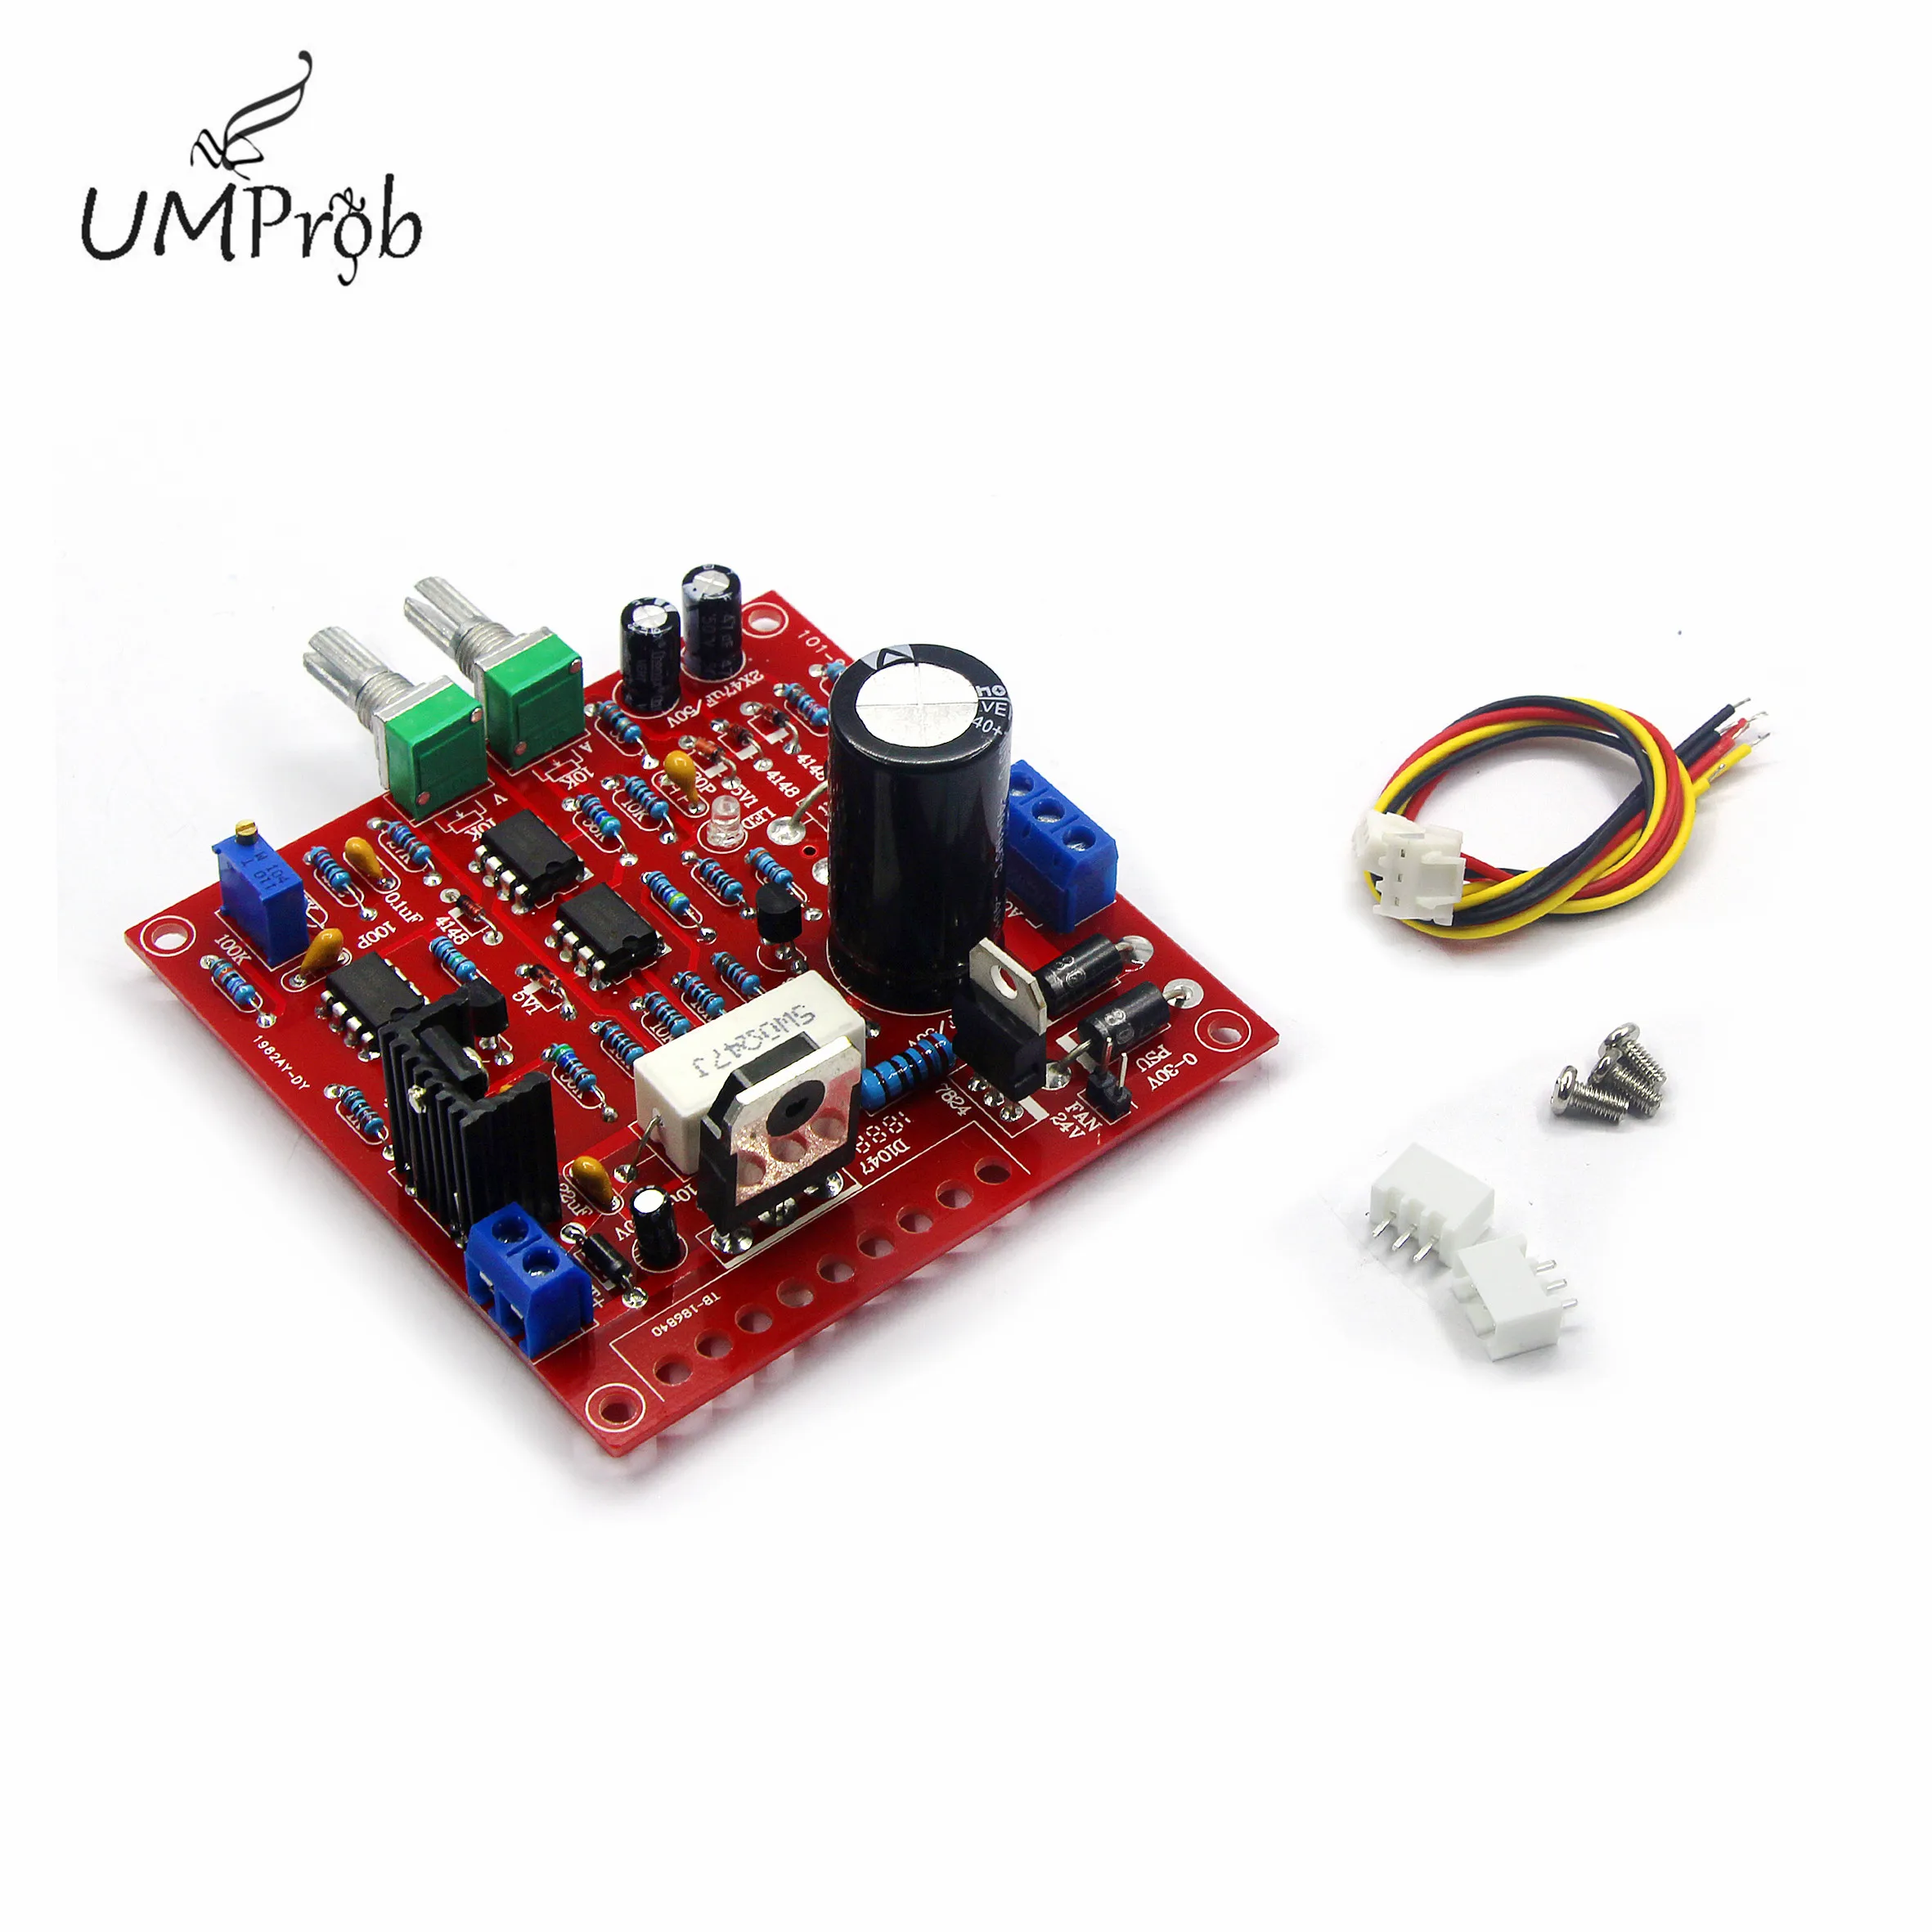 Details about   Red 0-30V 2mA-3A Continuously Adjustable DC Regulated Power Supply DIY Kit  SY 